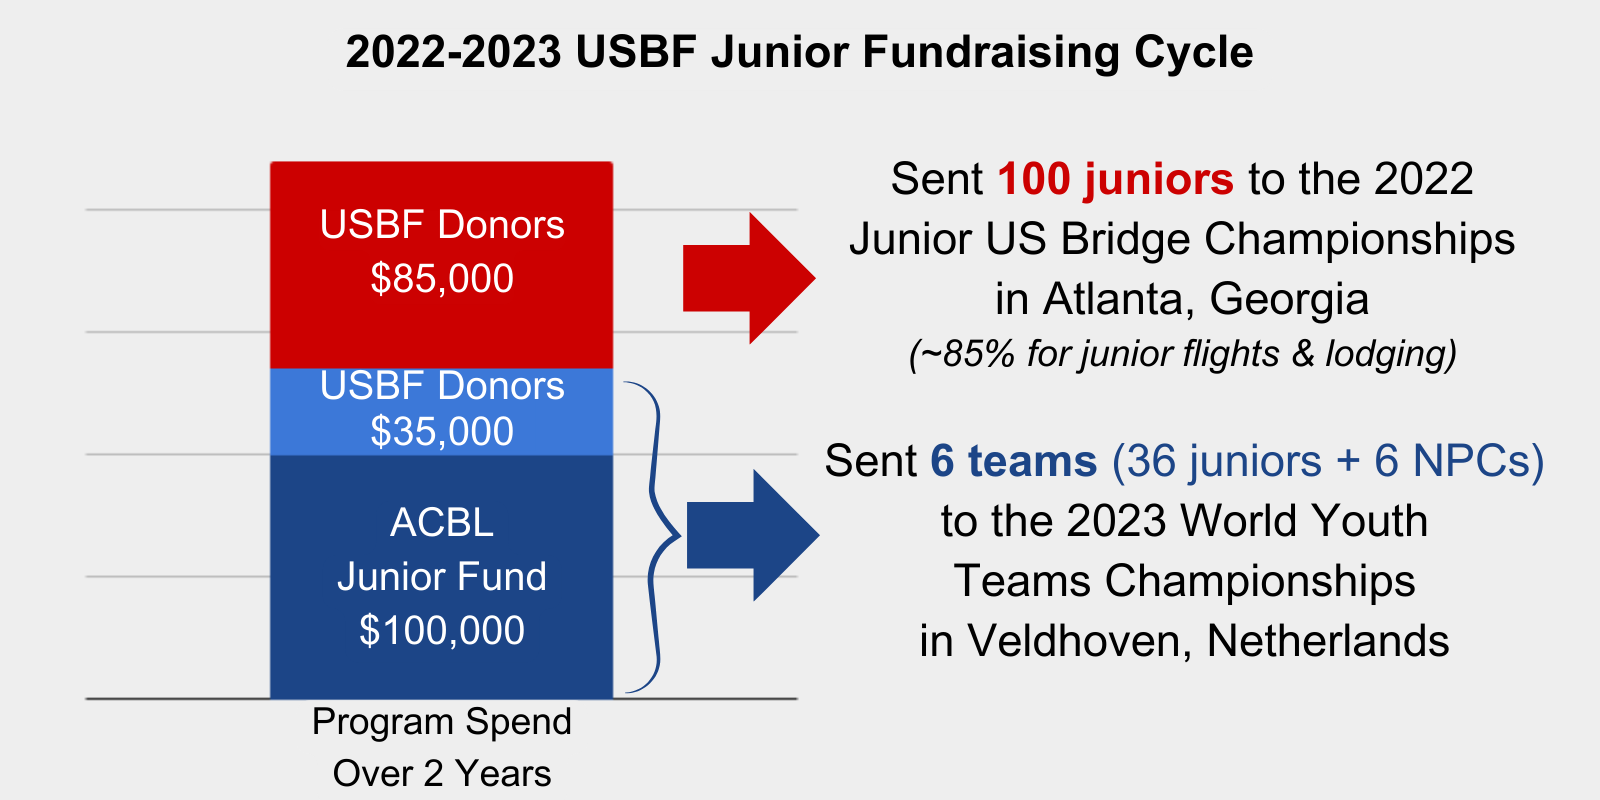 2022 2023 USBF Junior Fundraising Cycle 7